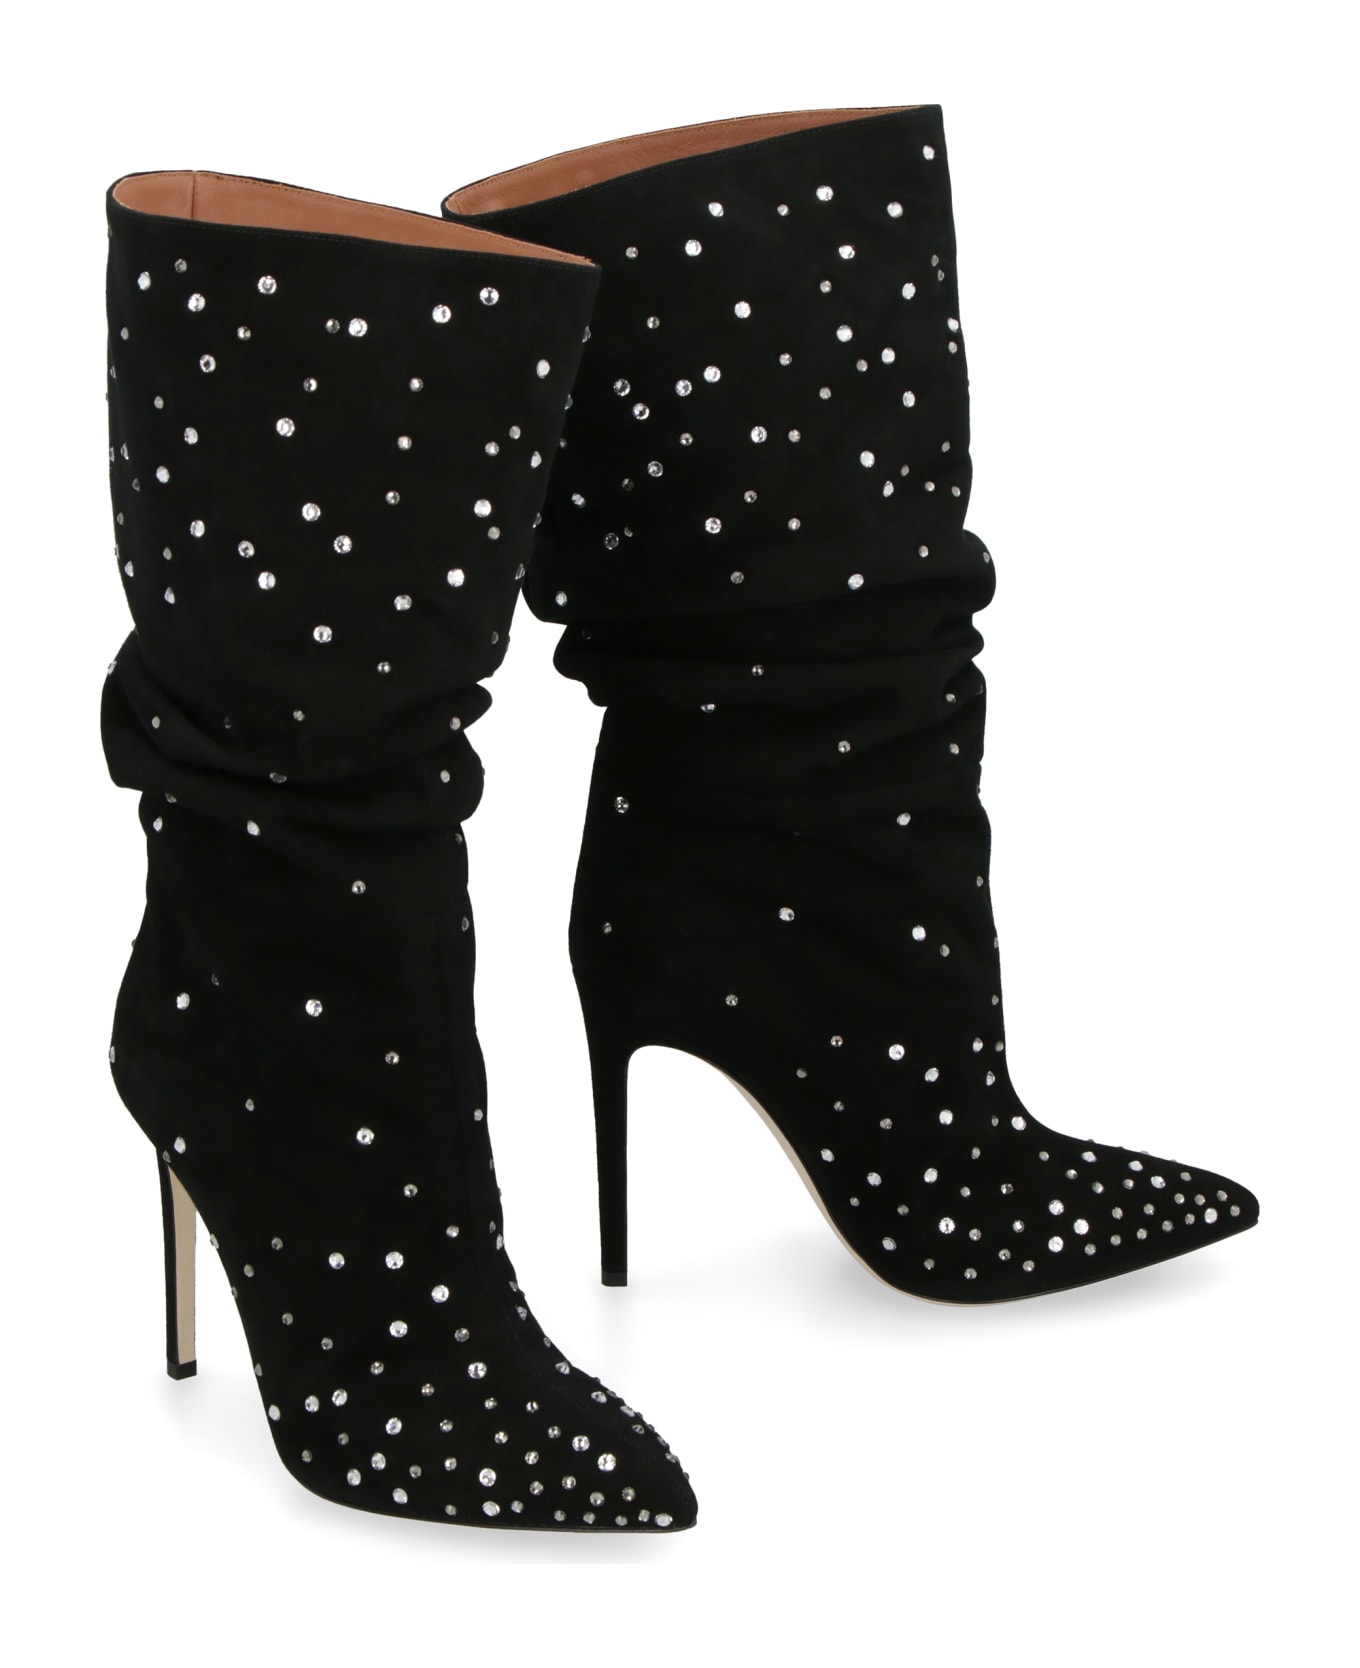 Paris Texas Holly Suede Knee High Boots - black ブーツ